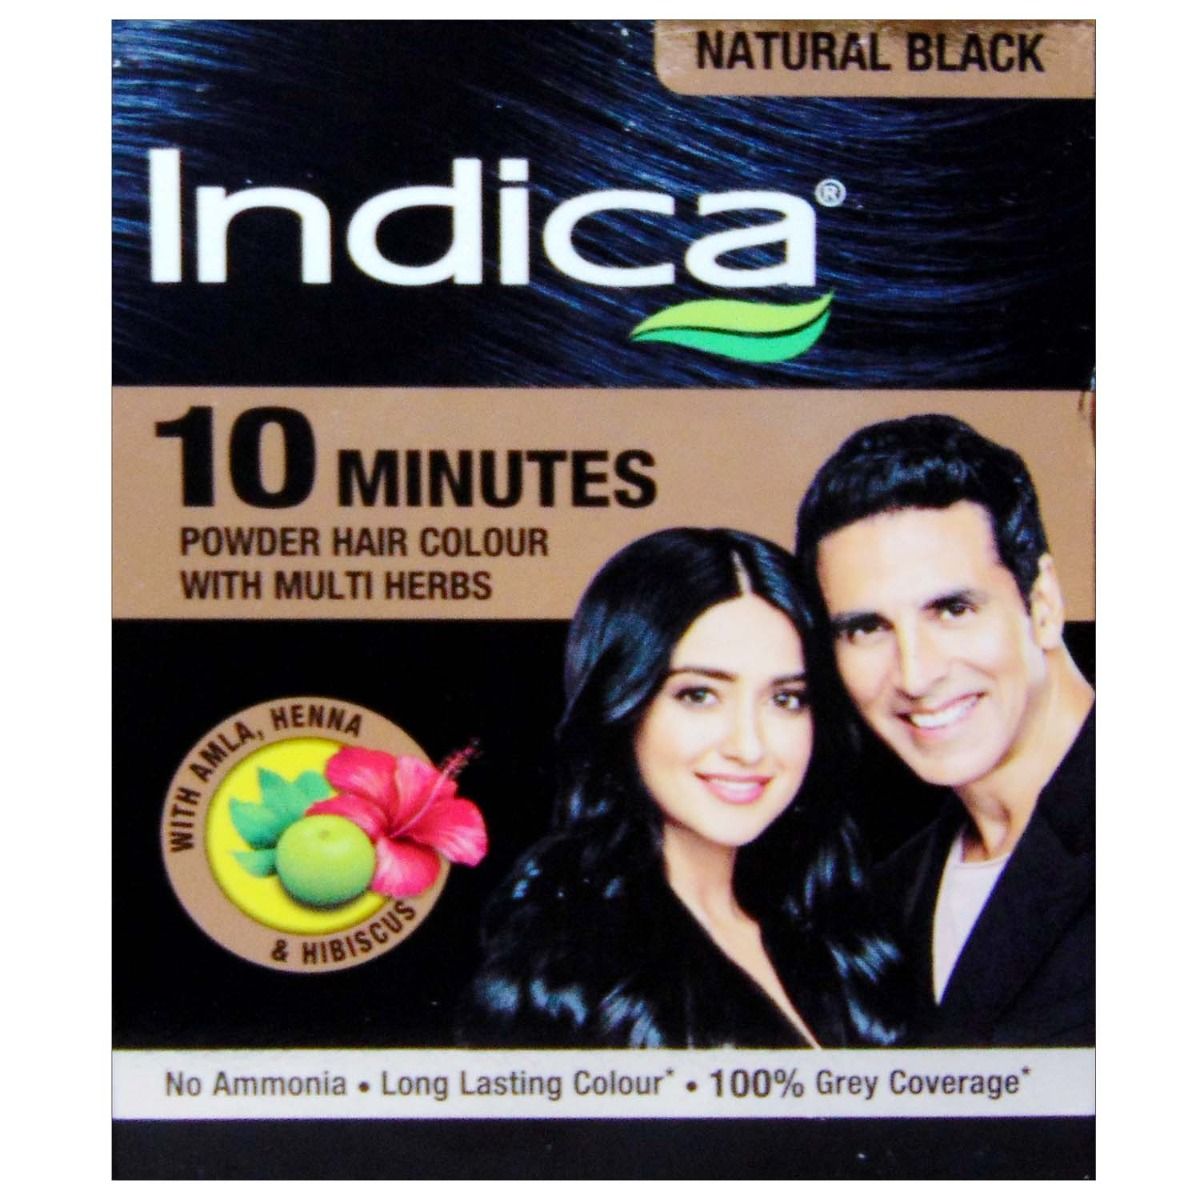 Indica Easy Hair Colour Natural Black, 5 ml Price, Uses, Side Effects,  Composition - Apollo Pharmacy